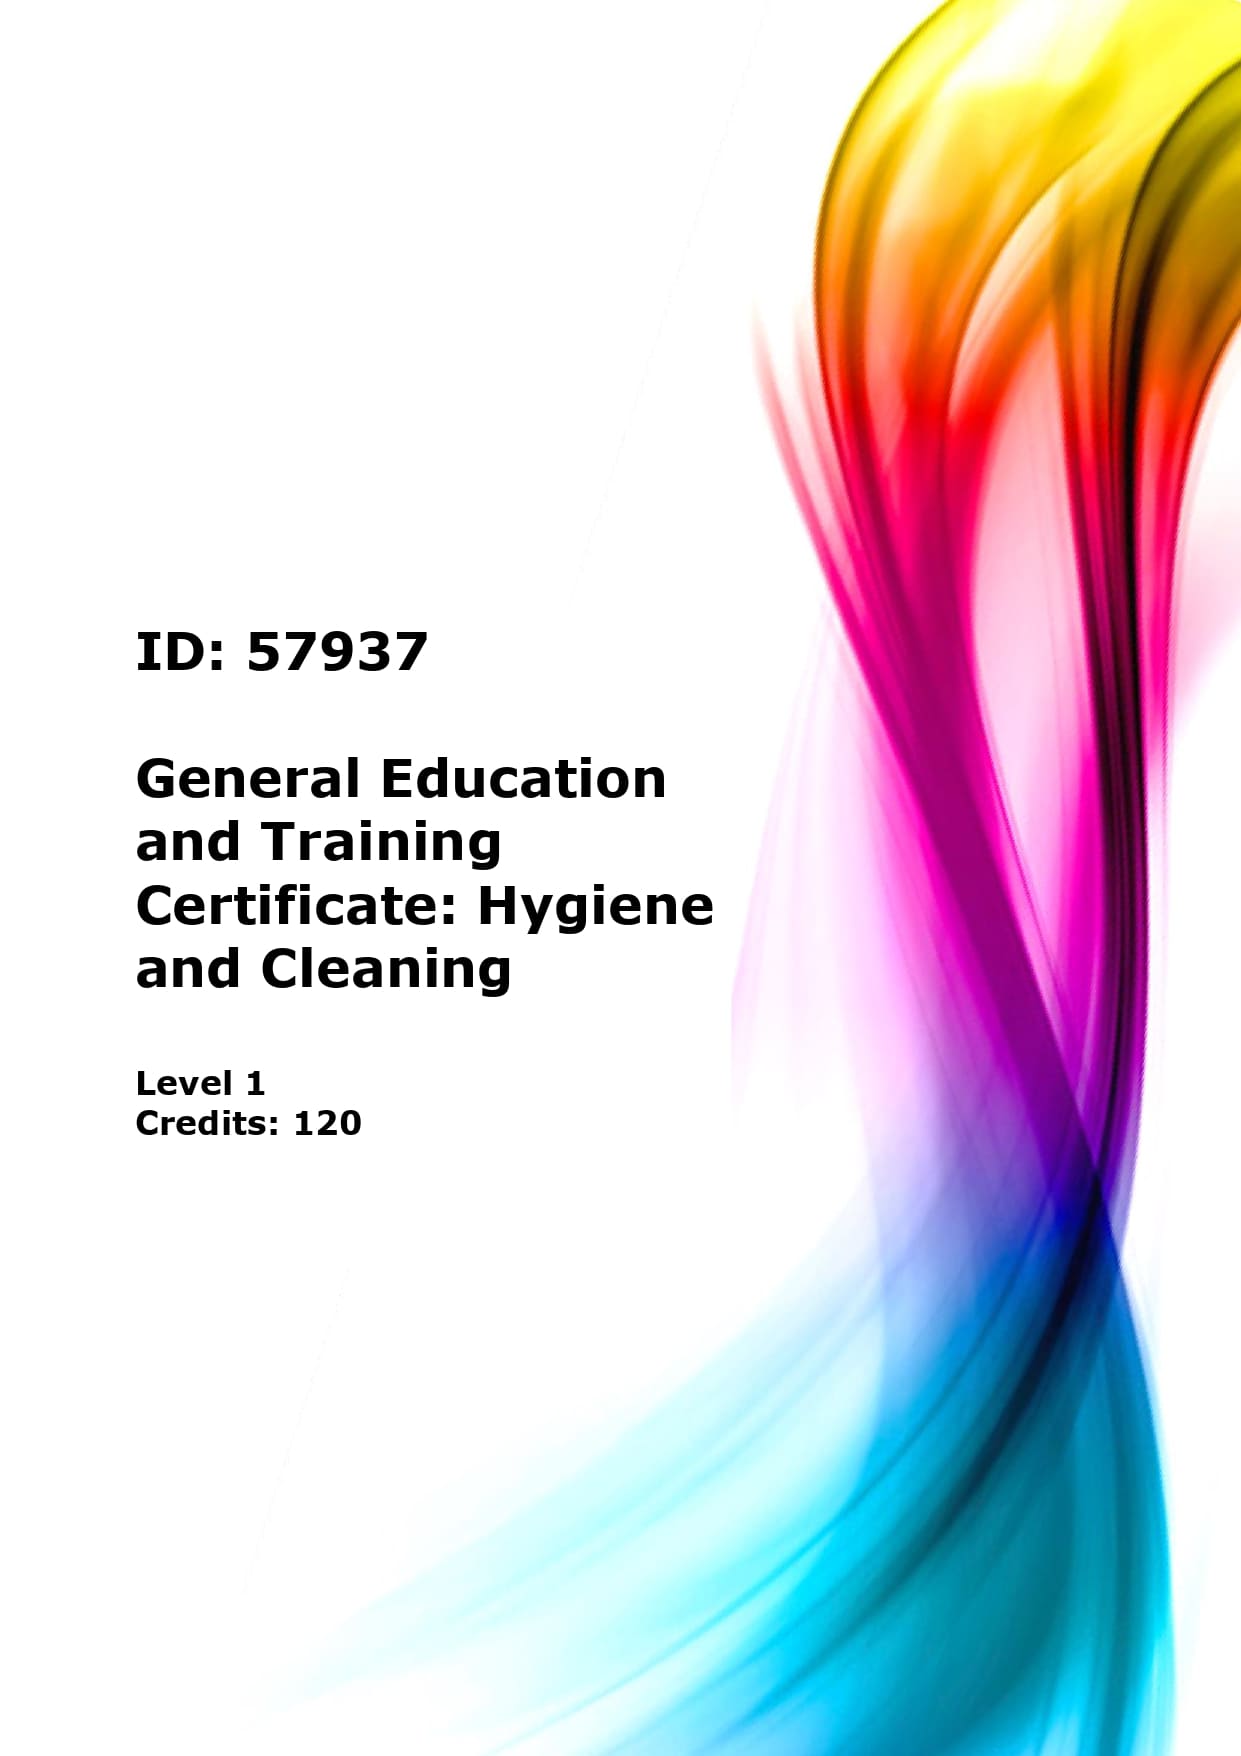 General Education and Training Certificate: Hygiene and Cleaning